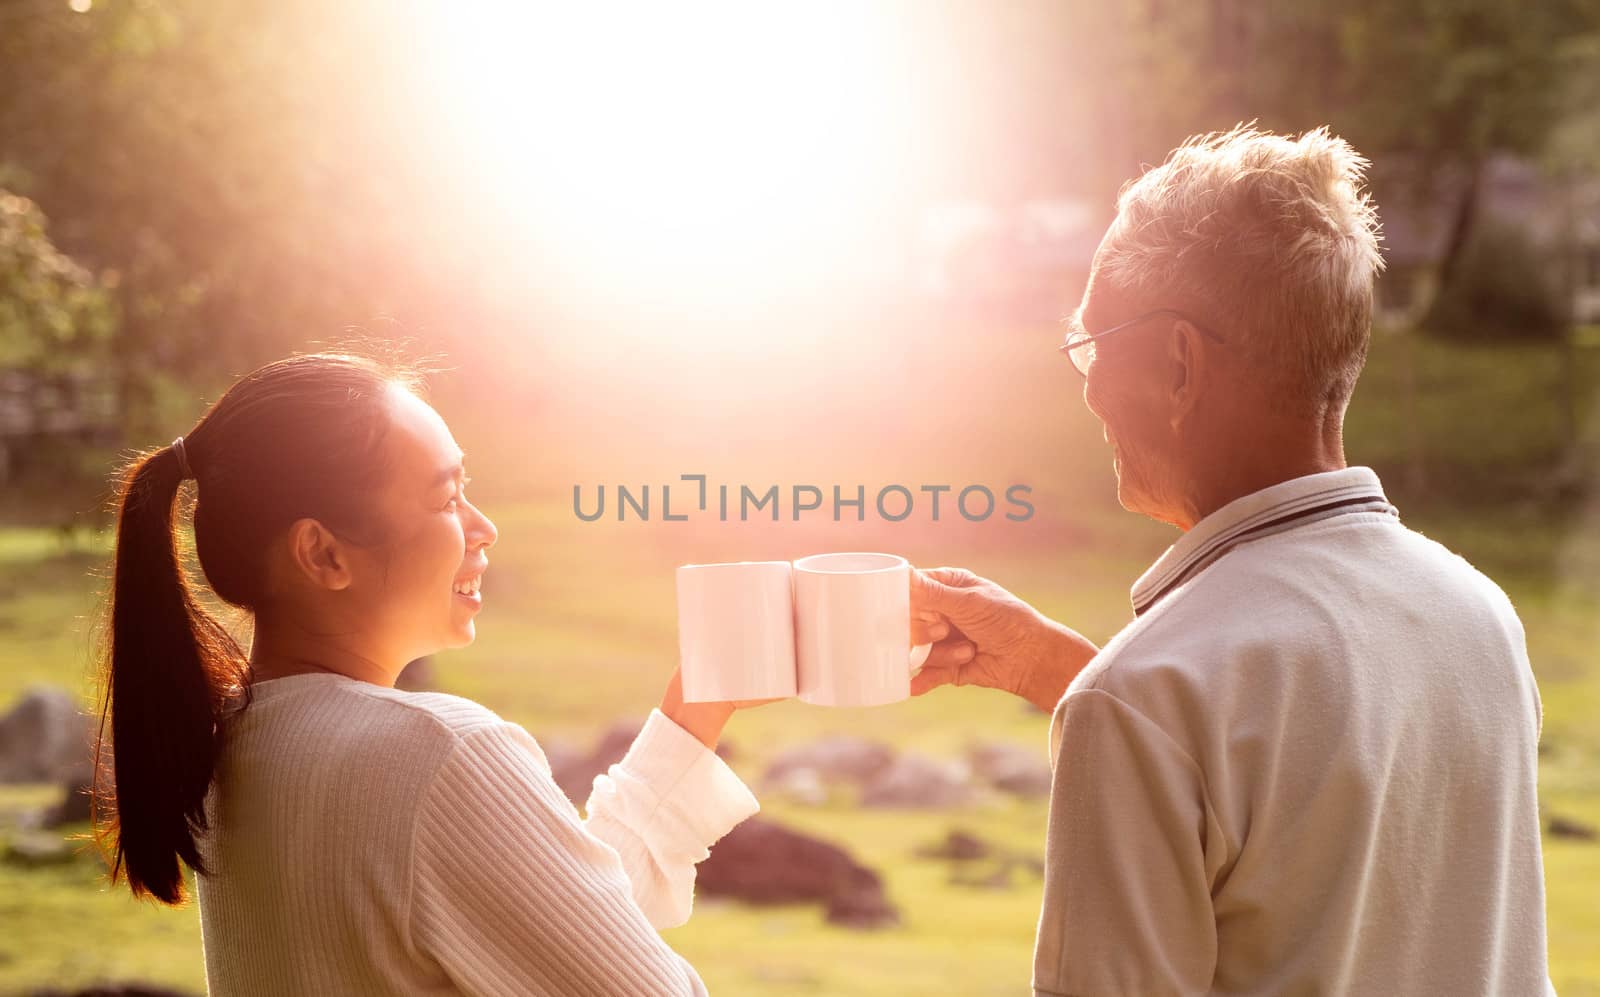 Rear view of granddaughter and grandfather drinking hot coffee outdoor and enjoying landscape during holiday on the mountain with sunlight in morning.